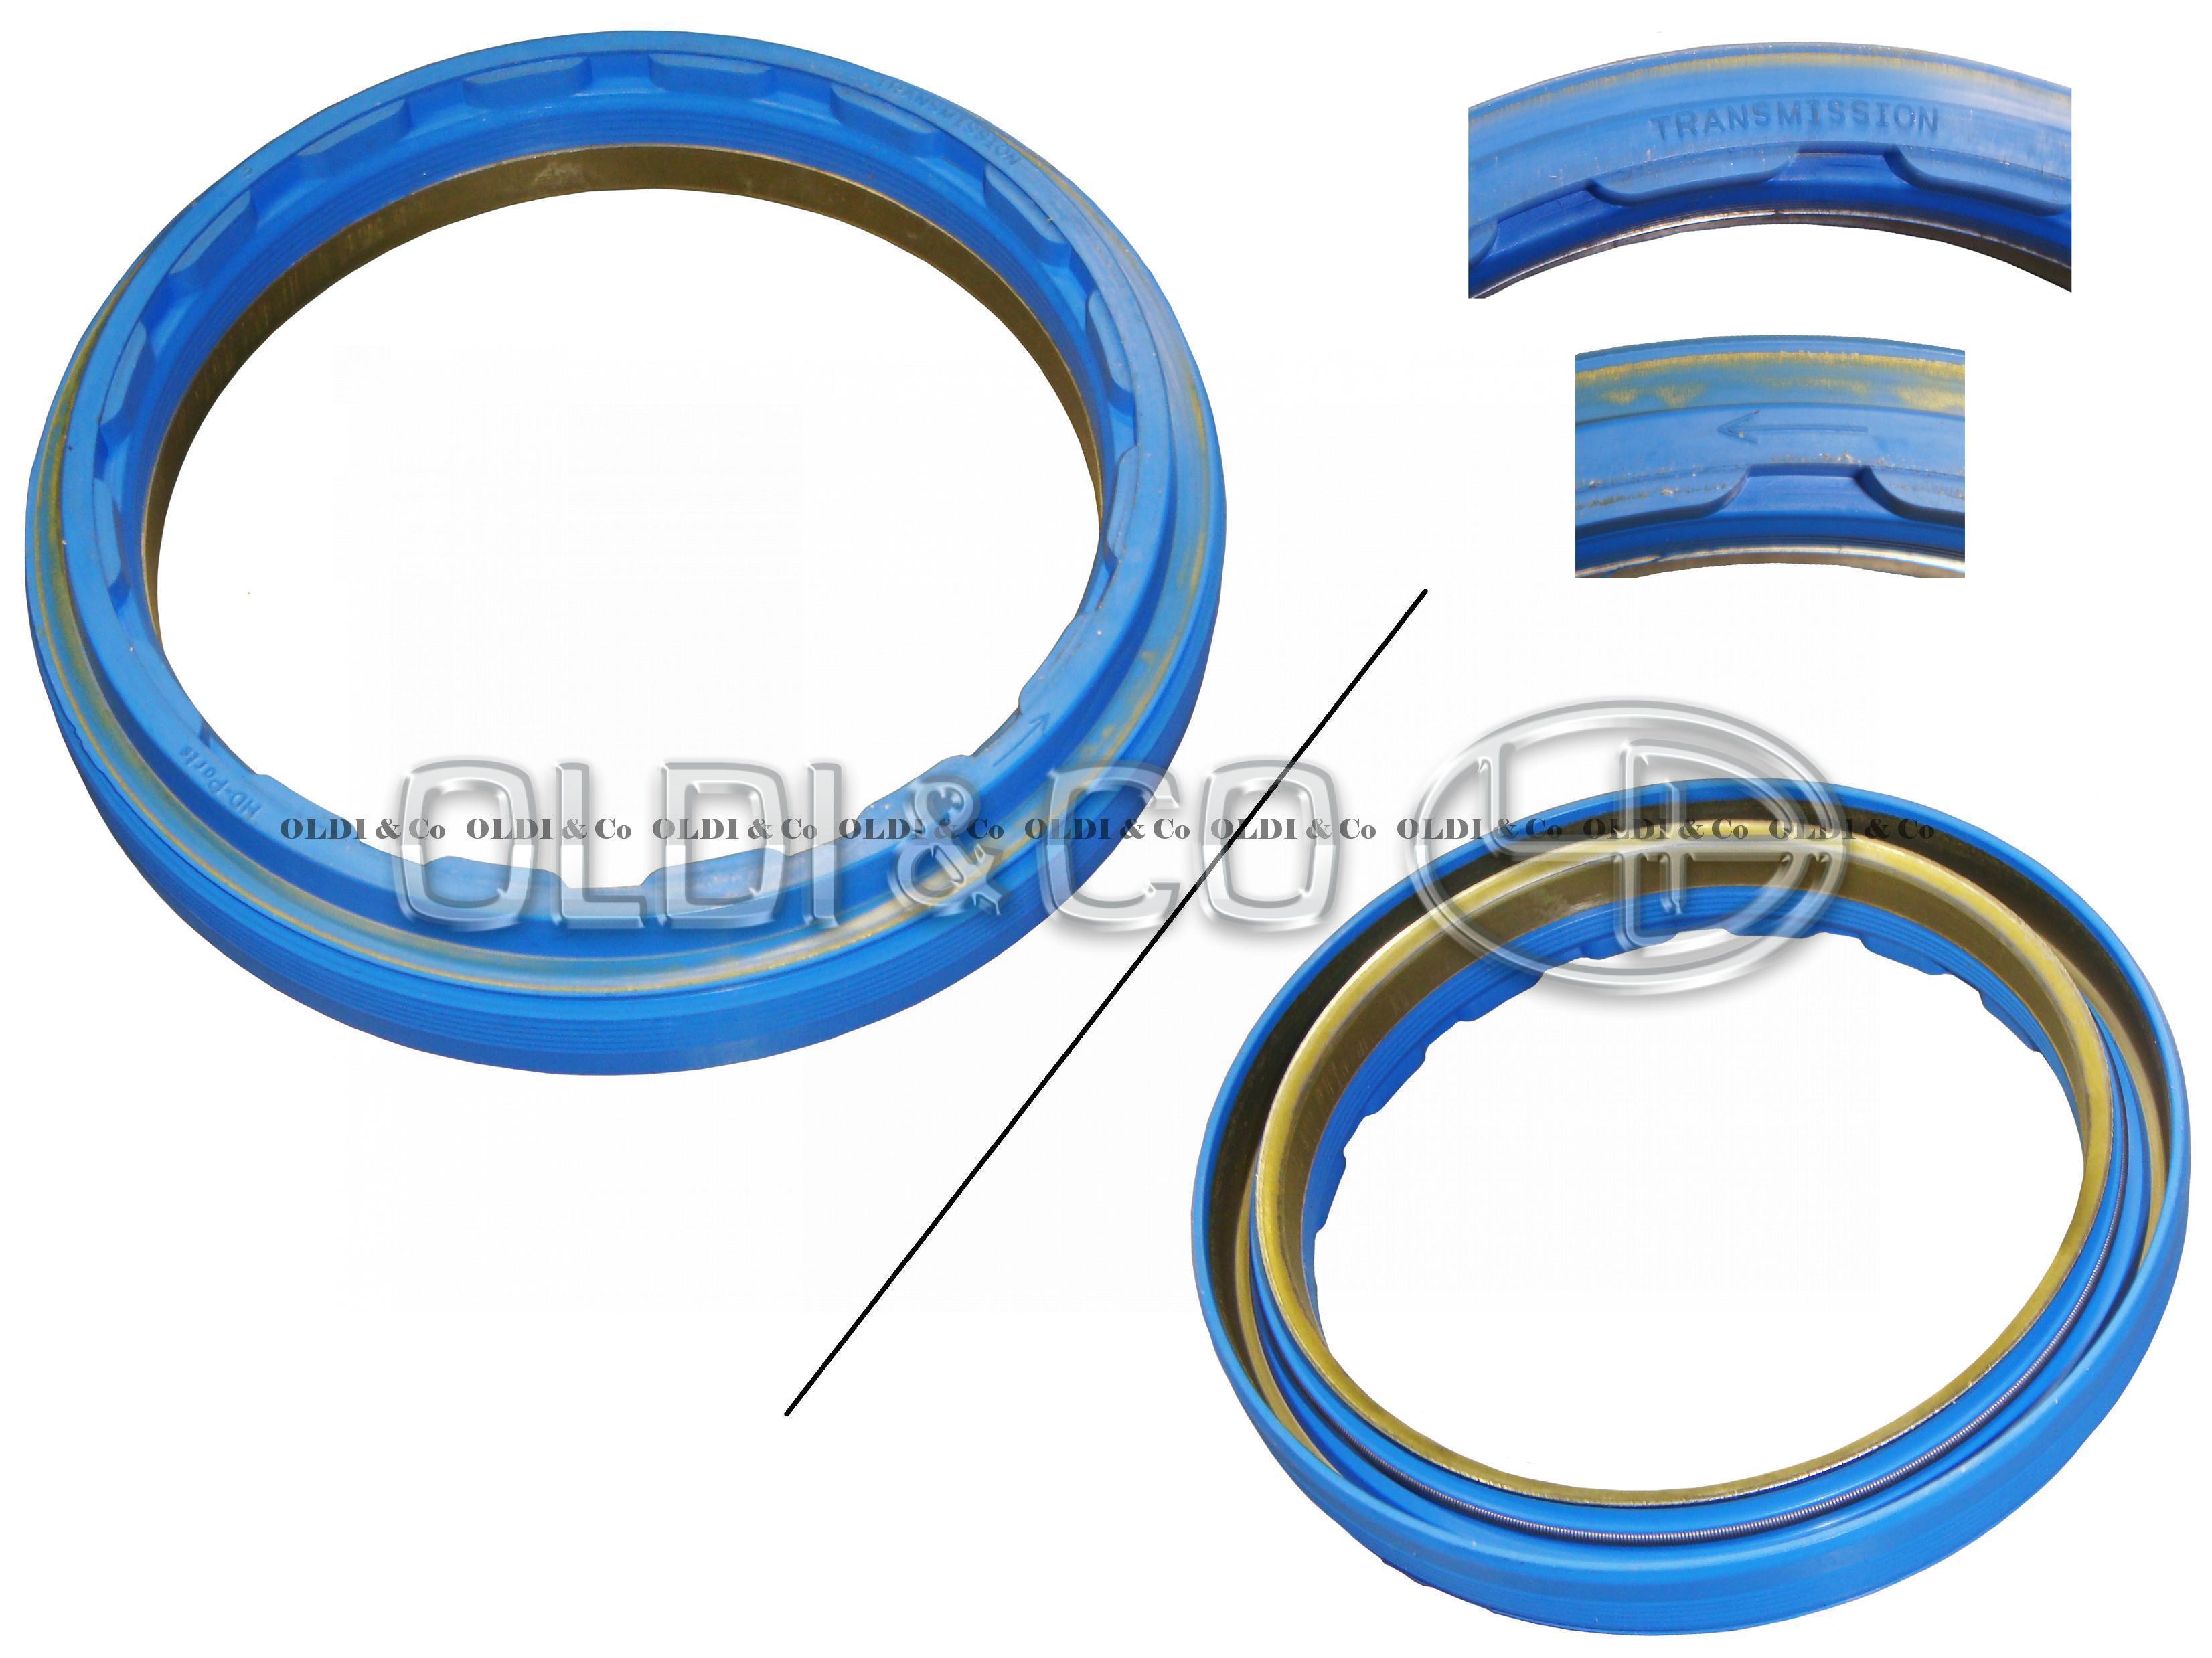 32.034.24101 Transmission parts → Gearbox raer oil seal